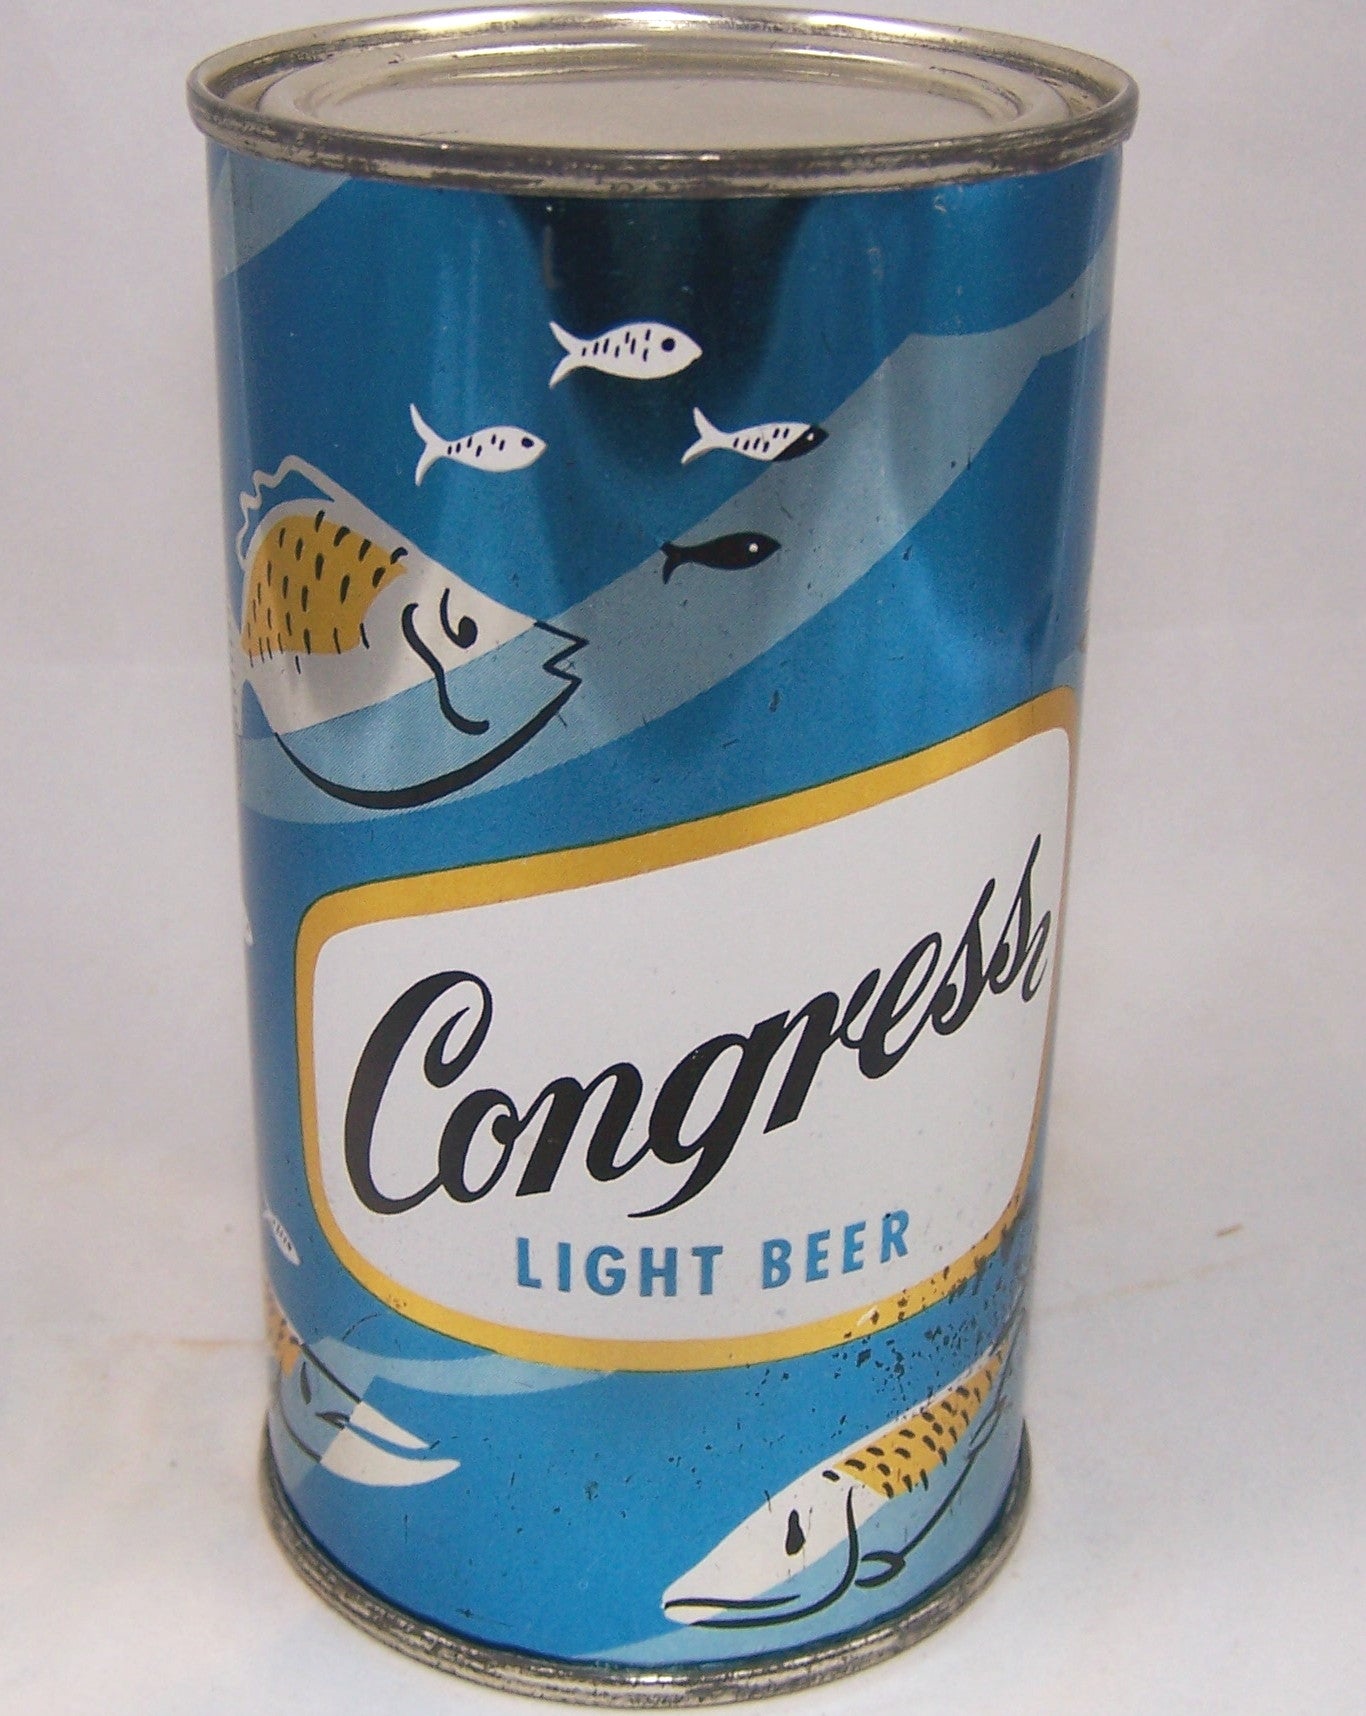 Congress Light Beer, (Fish) USBC 50-21, Grade 1 to 1/1+ Rolled Sold on 10/10/15